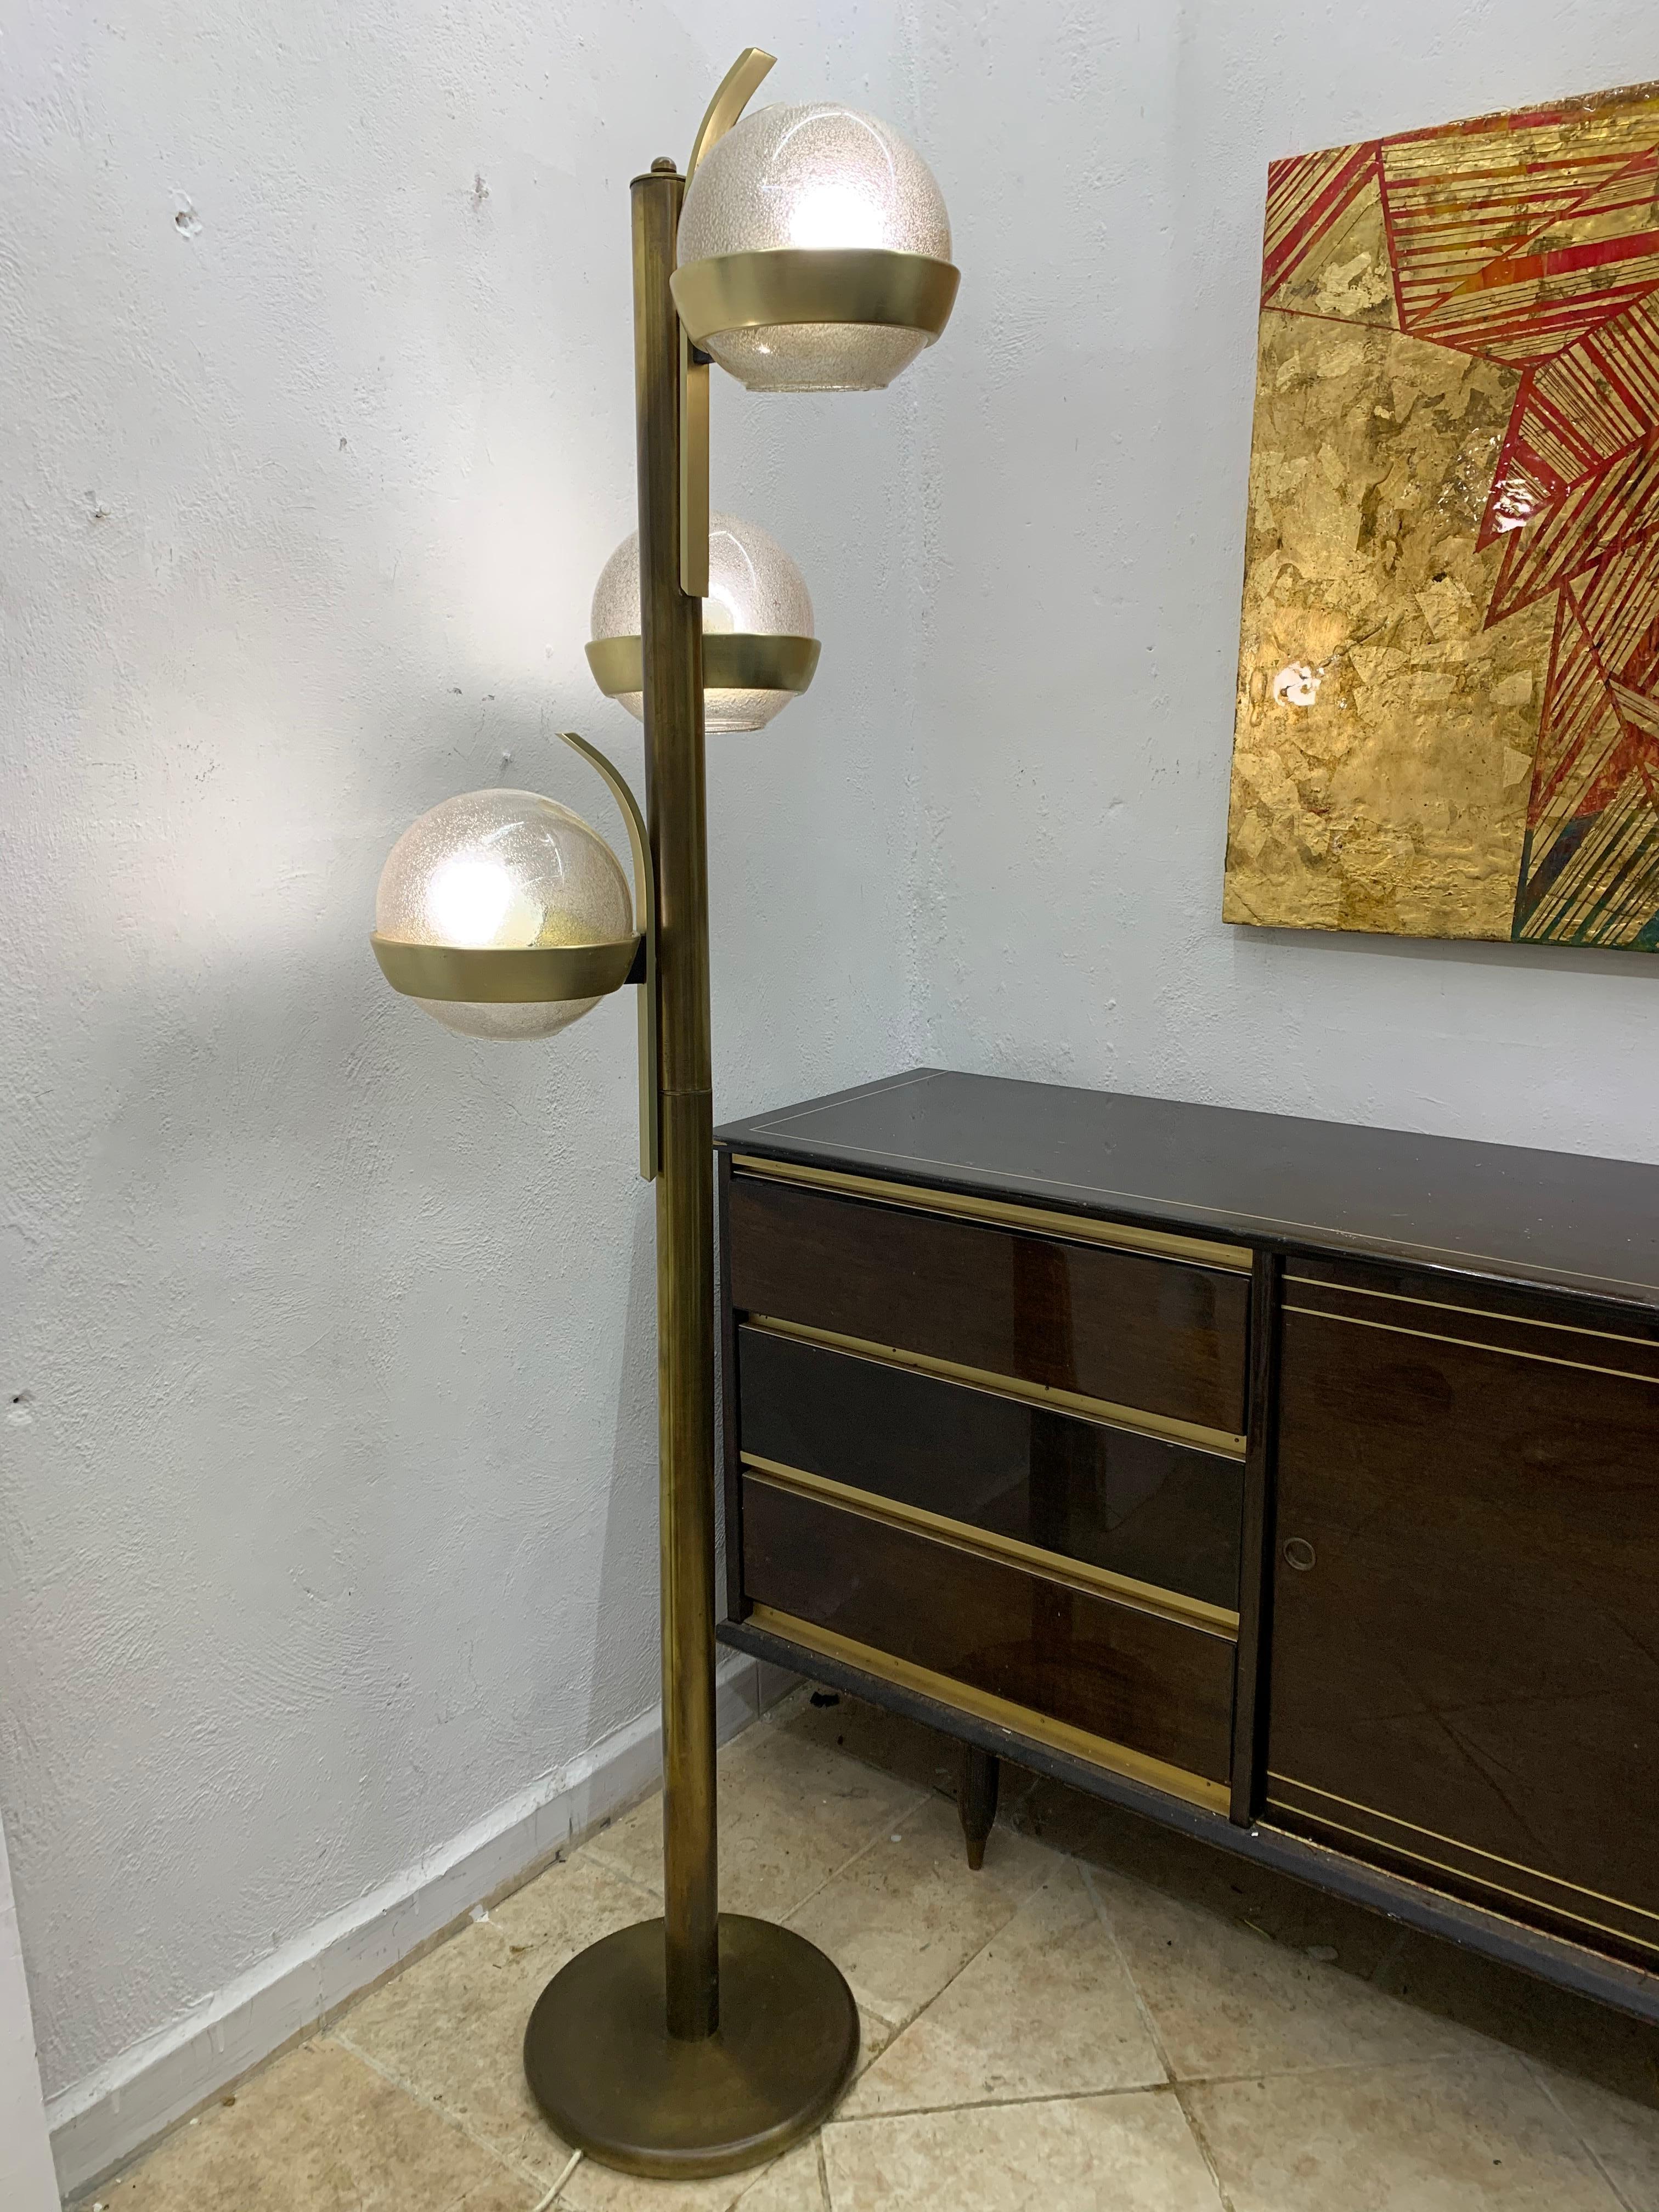 Space Age Floor Lamp by Lumi in Brass and Murano Glass, circa 1960s For Sale 8